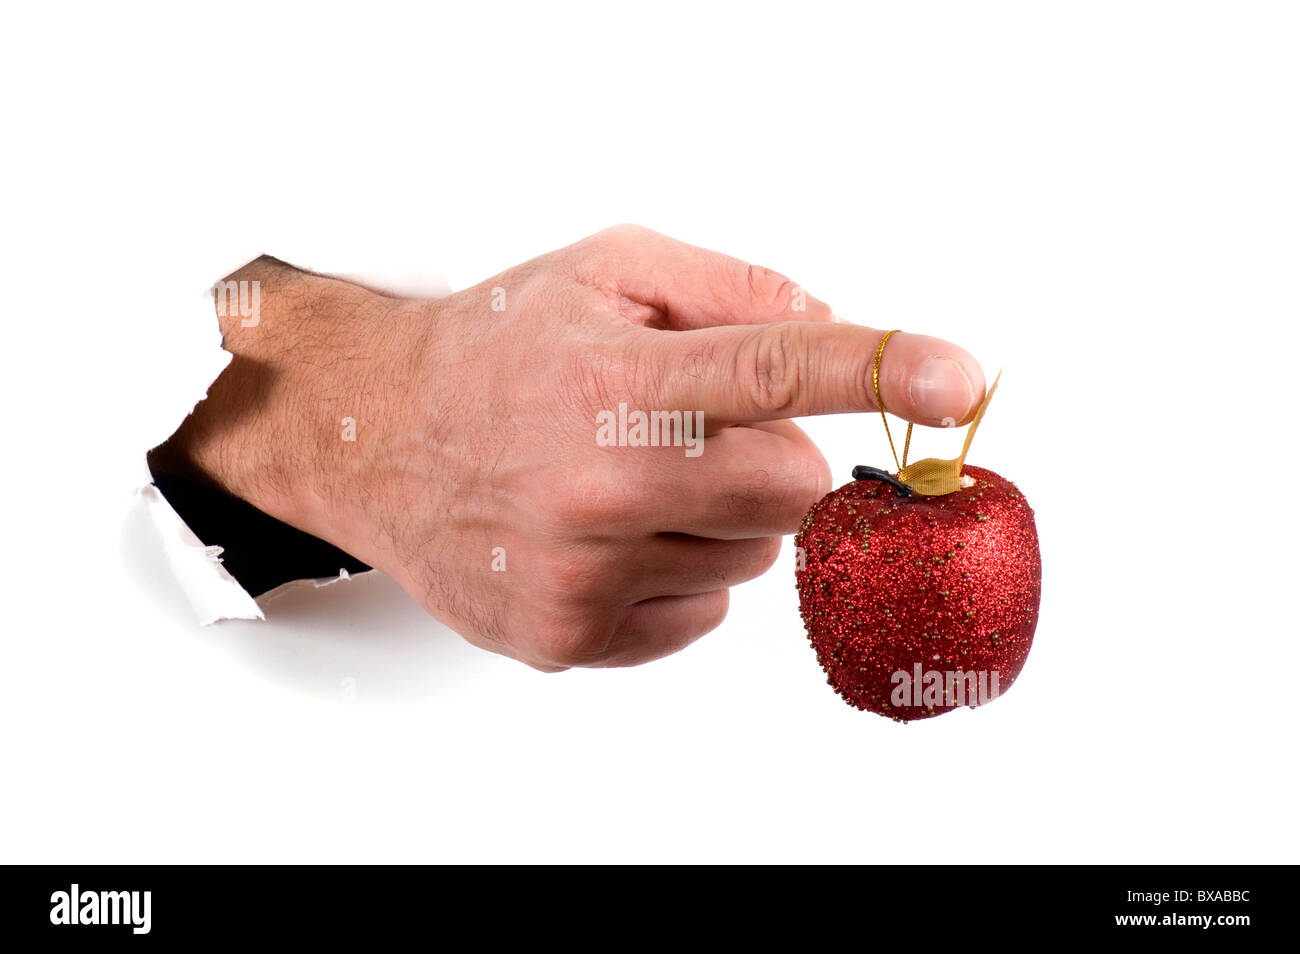 object on white - hand with Christmas decorations Stock Photo